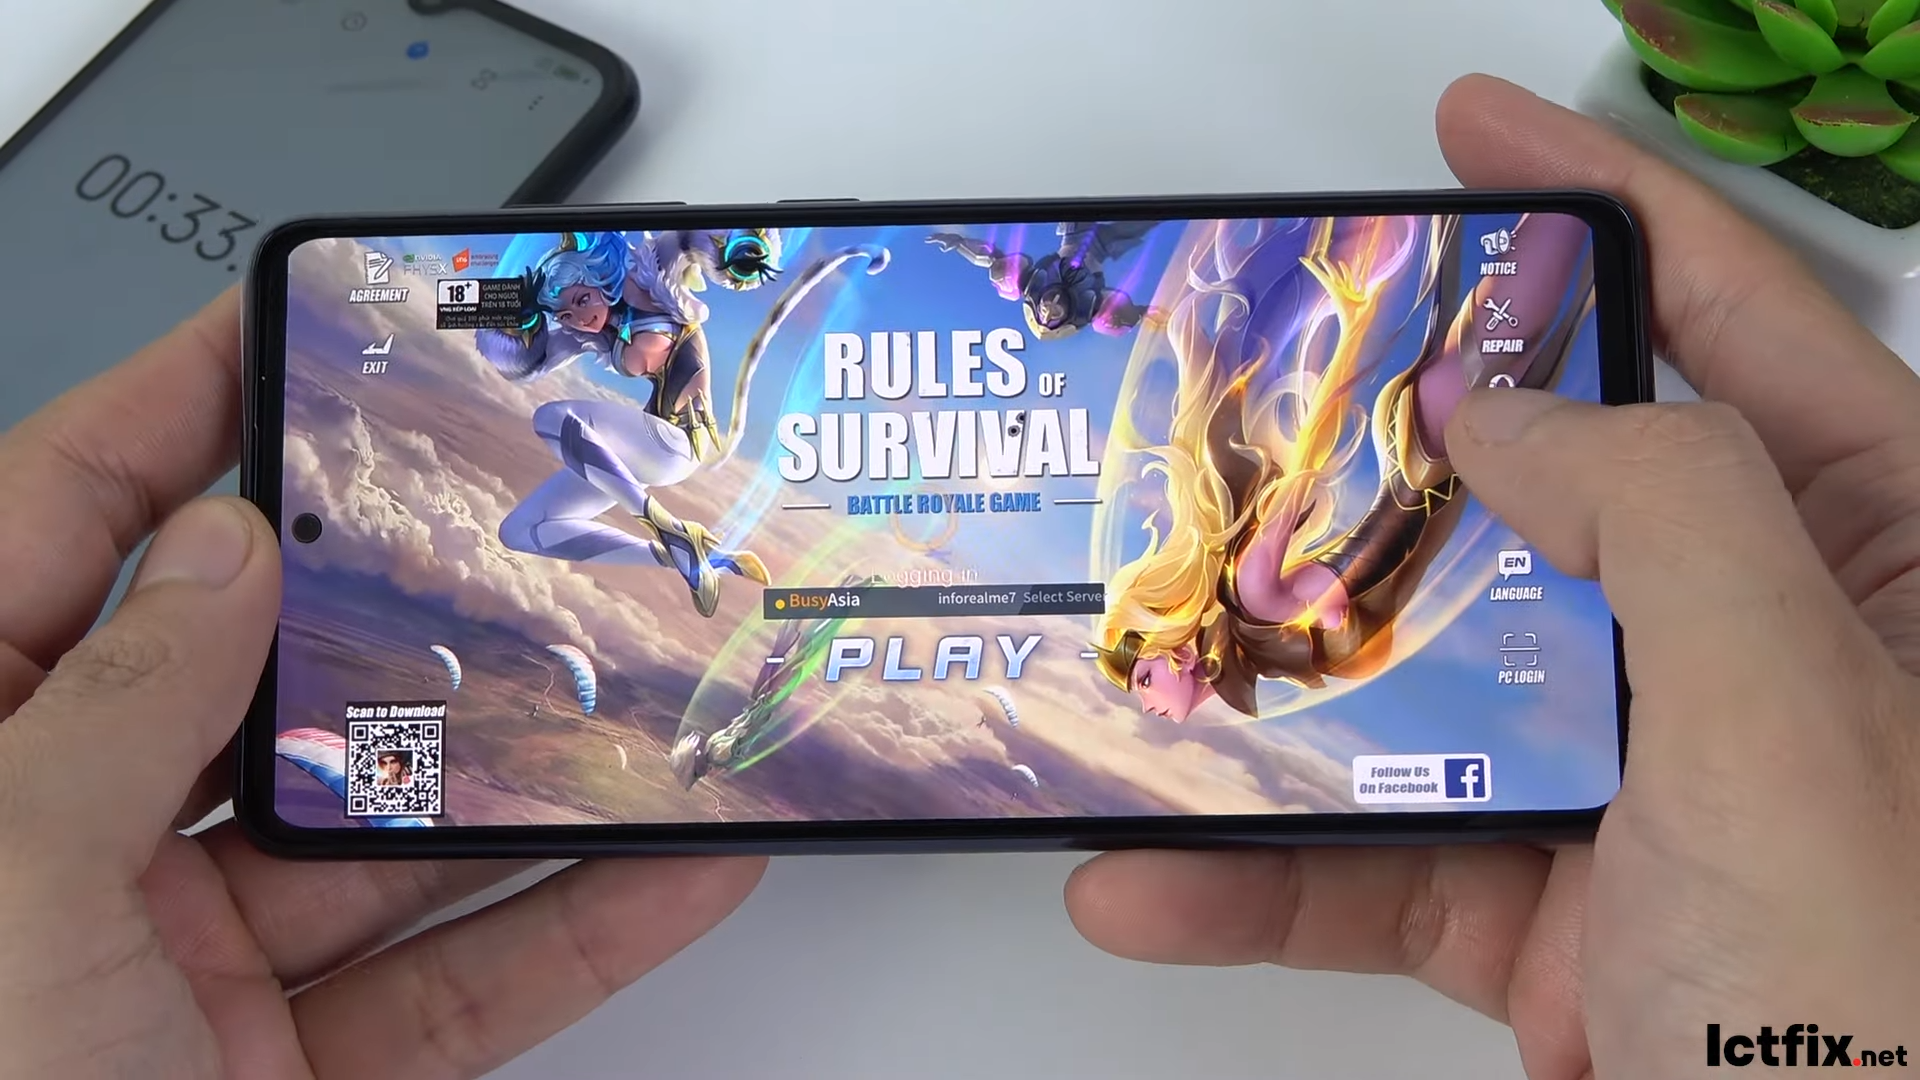 Samsung Galaxy S20 FE Snapdragon 865 test game Rules of Survival 